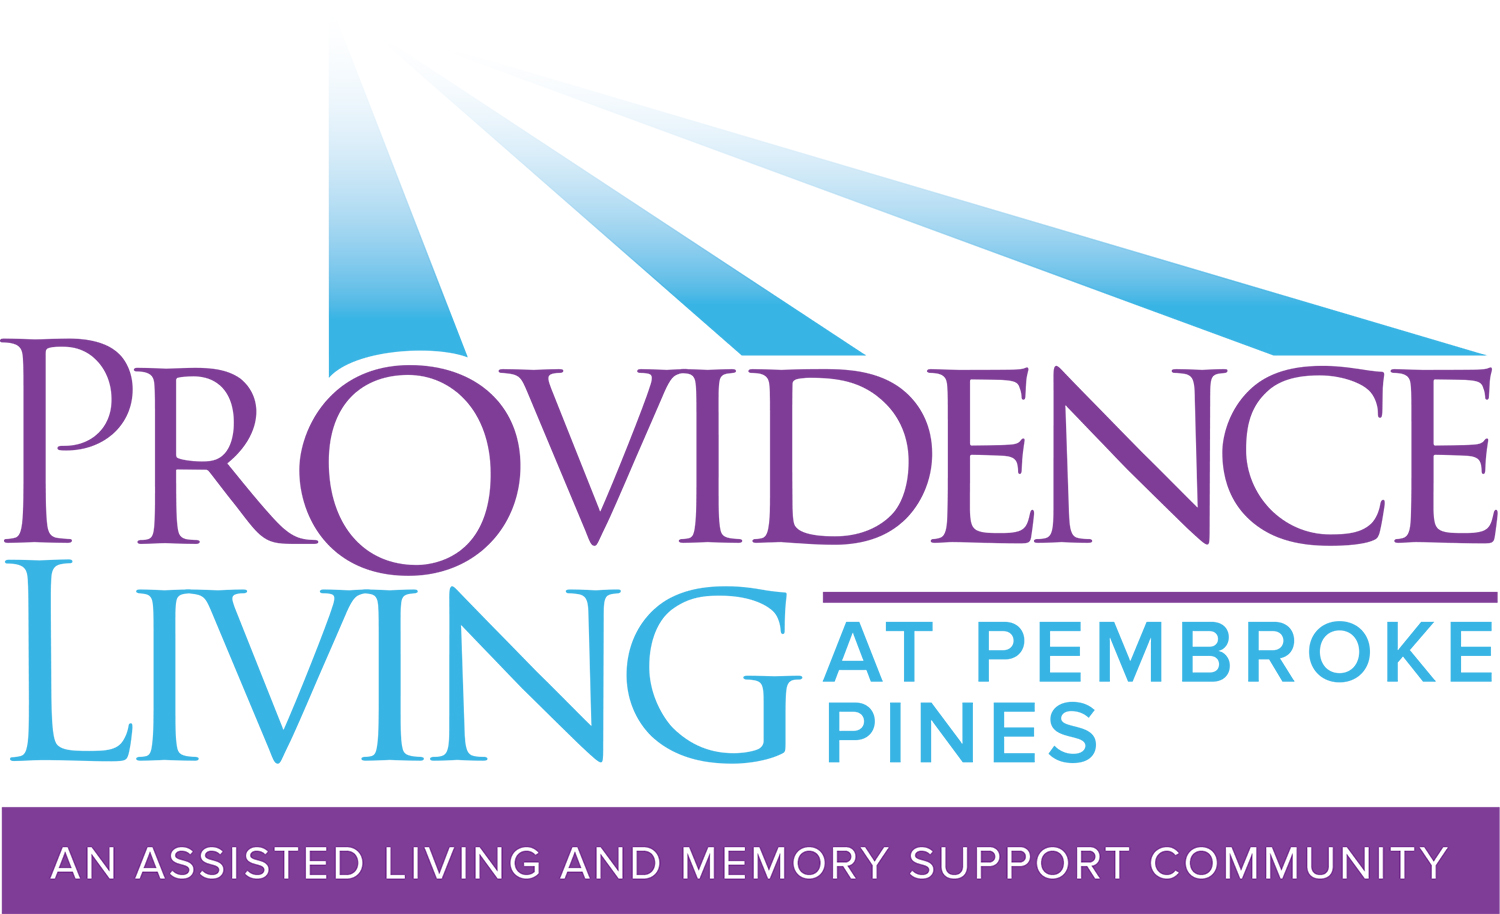 CCCCc. Providence Living at Pembroke Pines (Tier 4)